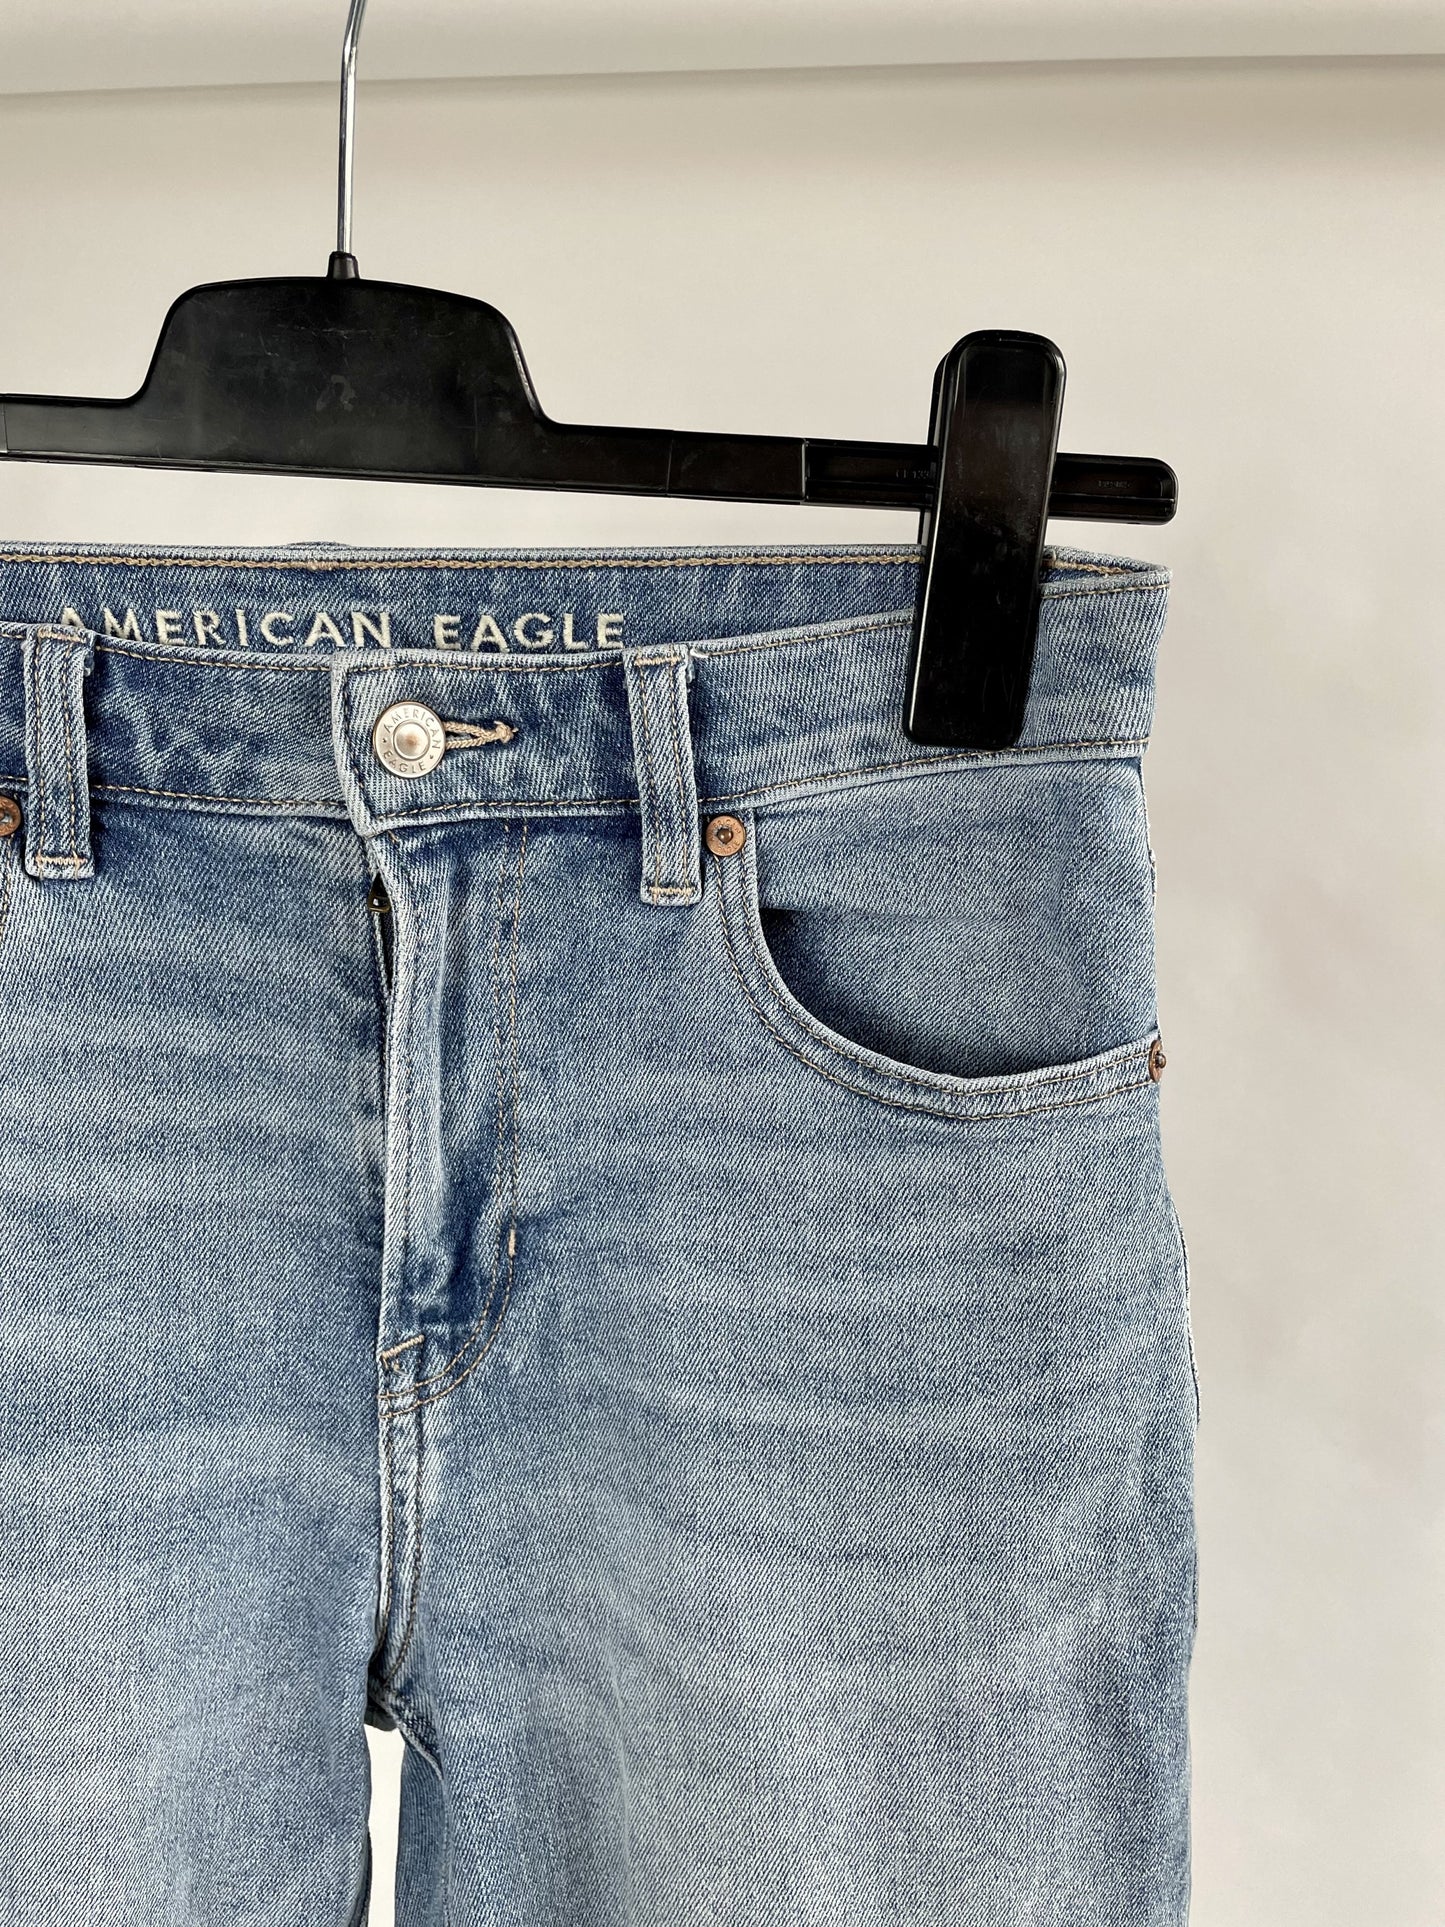 American Eagle jeany vel.S